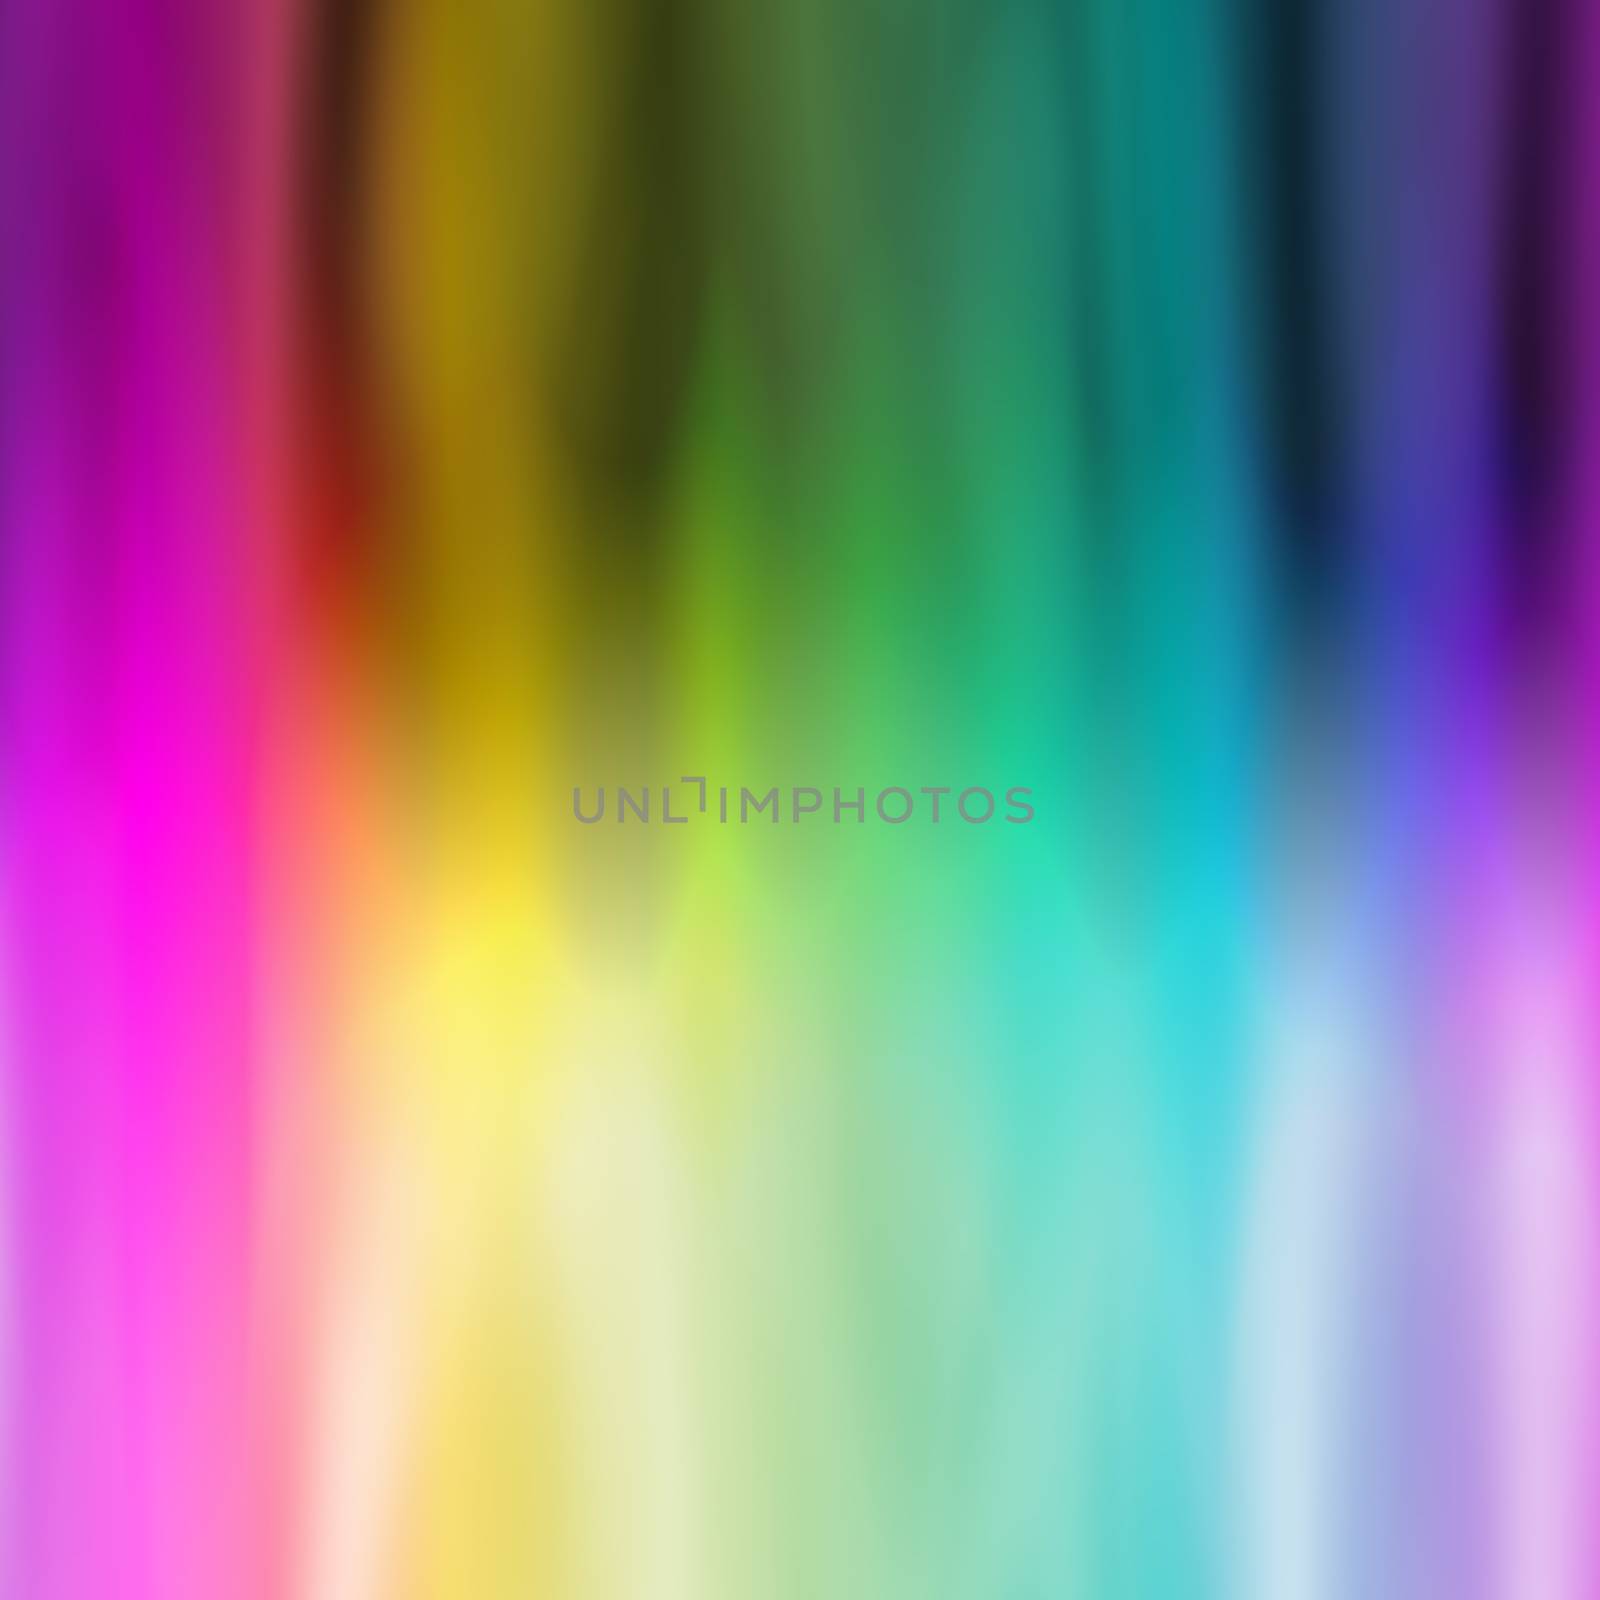 Rainbow abstract background in a variety of vivid colors.